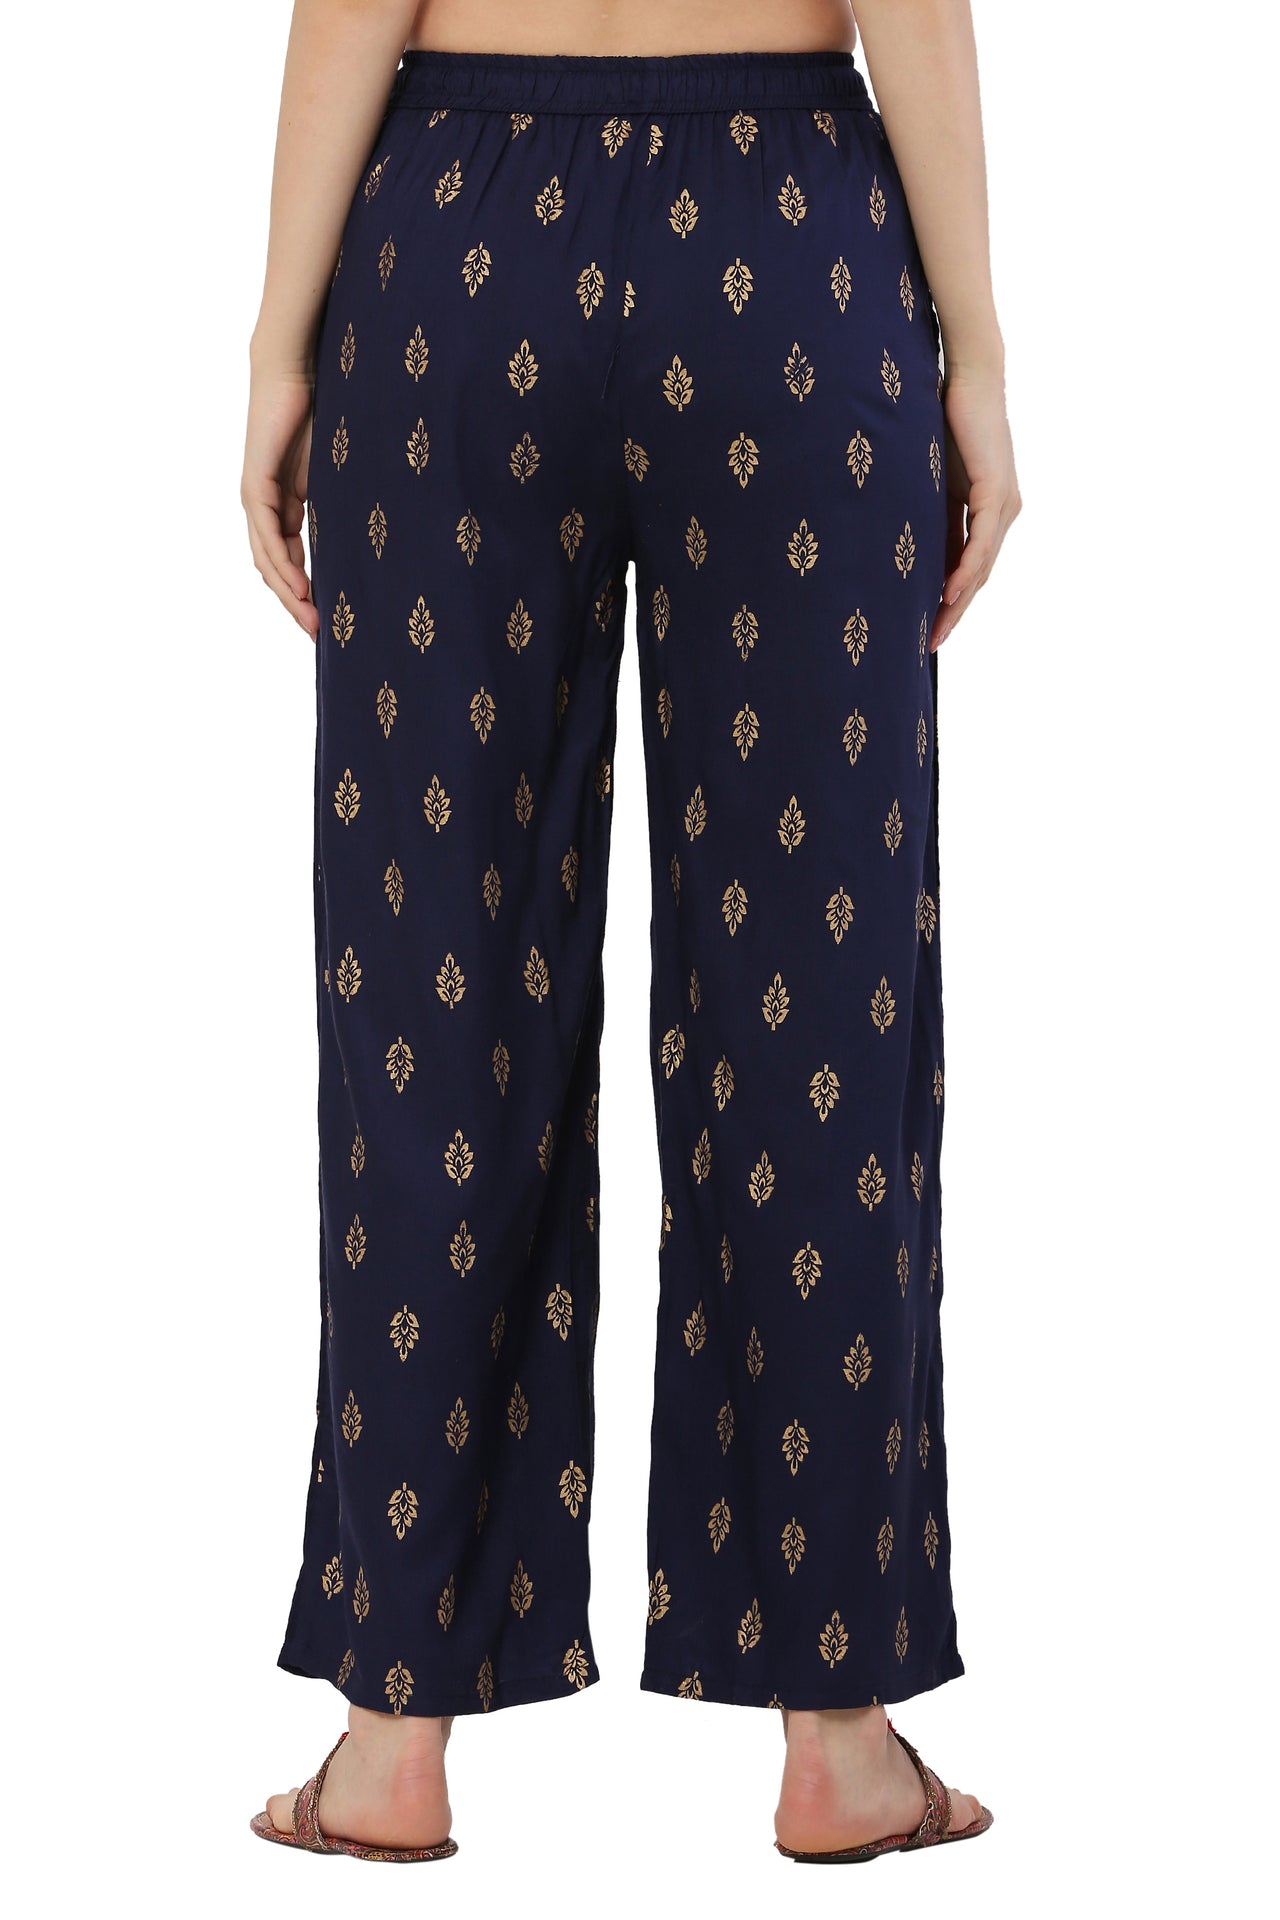 PAVONINE Navy Blue Color Full Golden Leaf Print Palazzo For Women Pant - Distacart